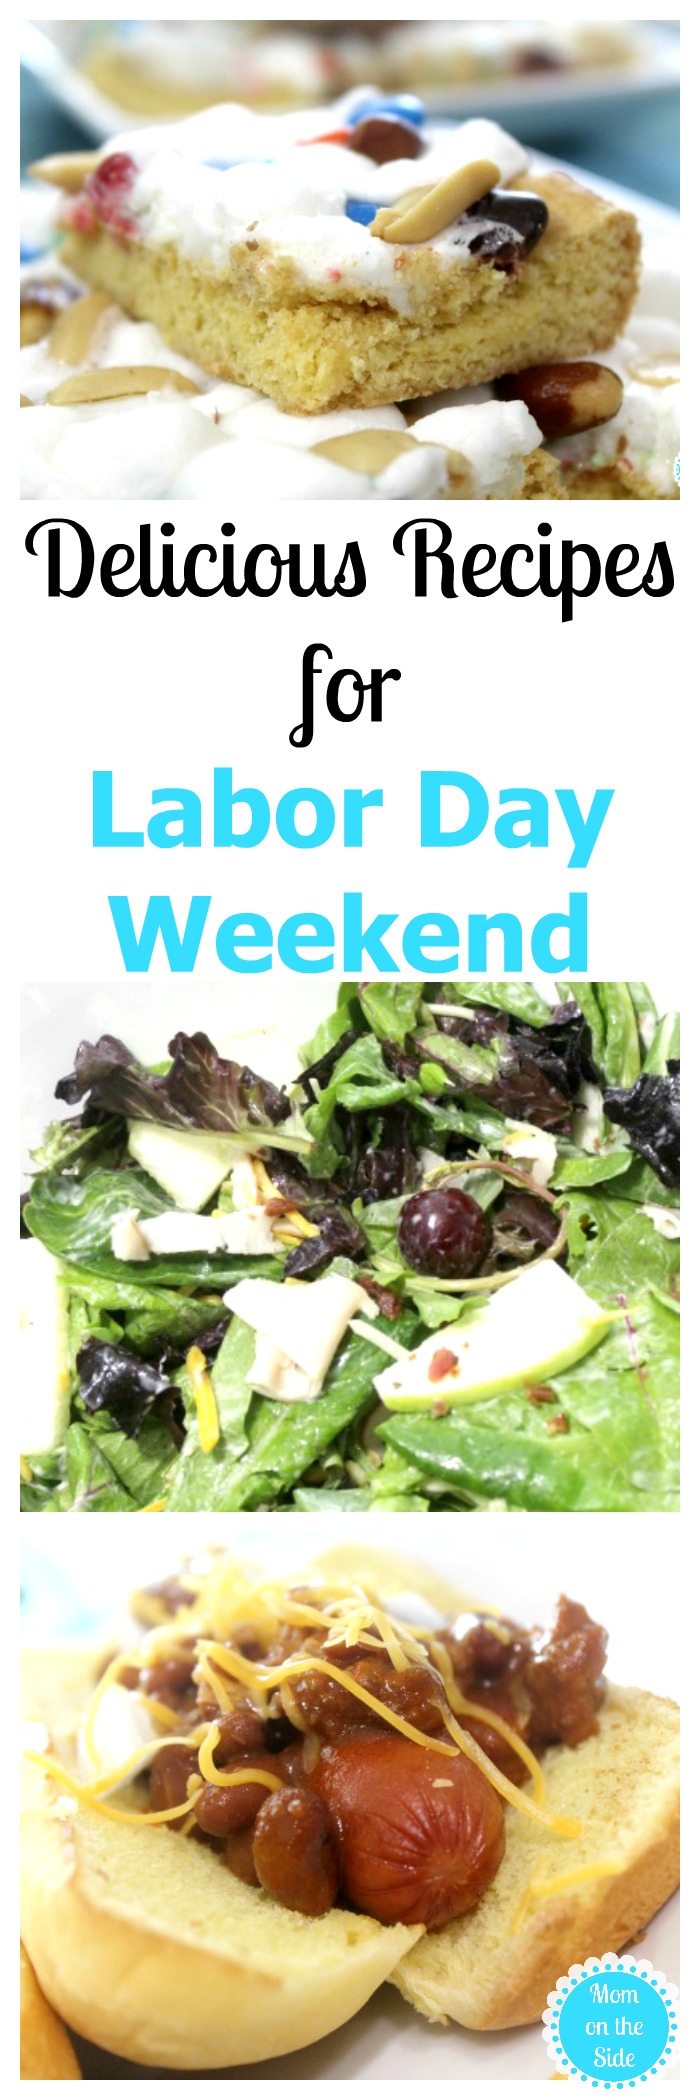 Delicious Labor Day Weekend Recipes